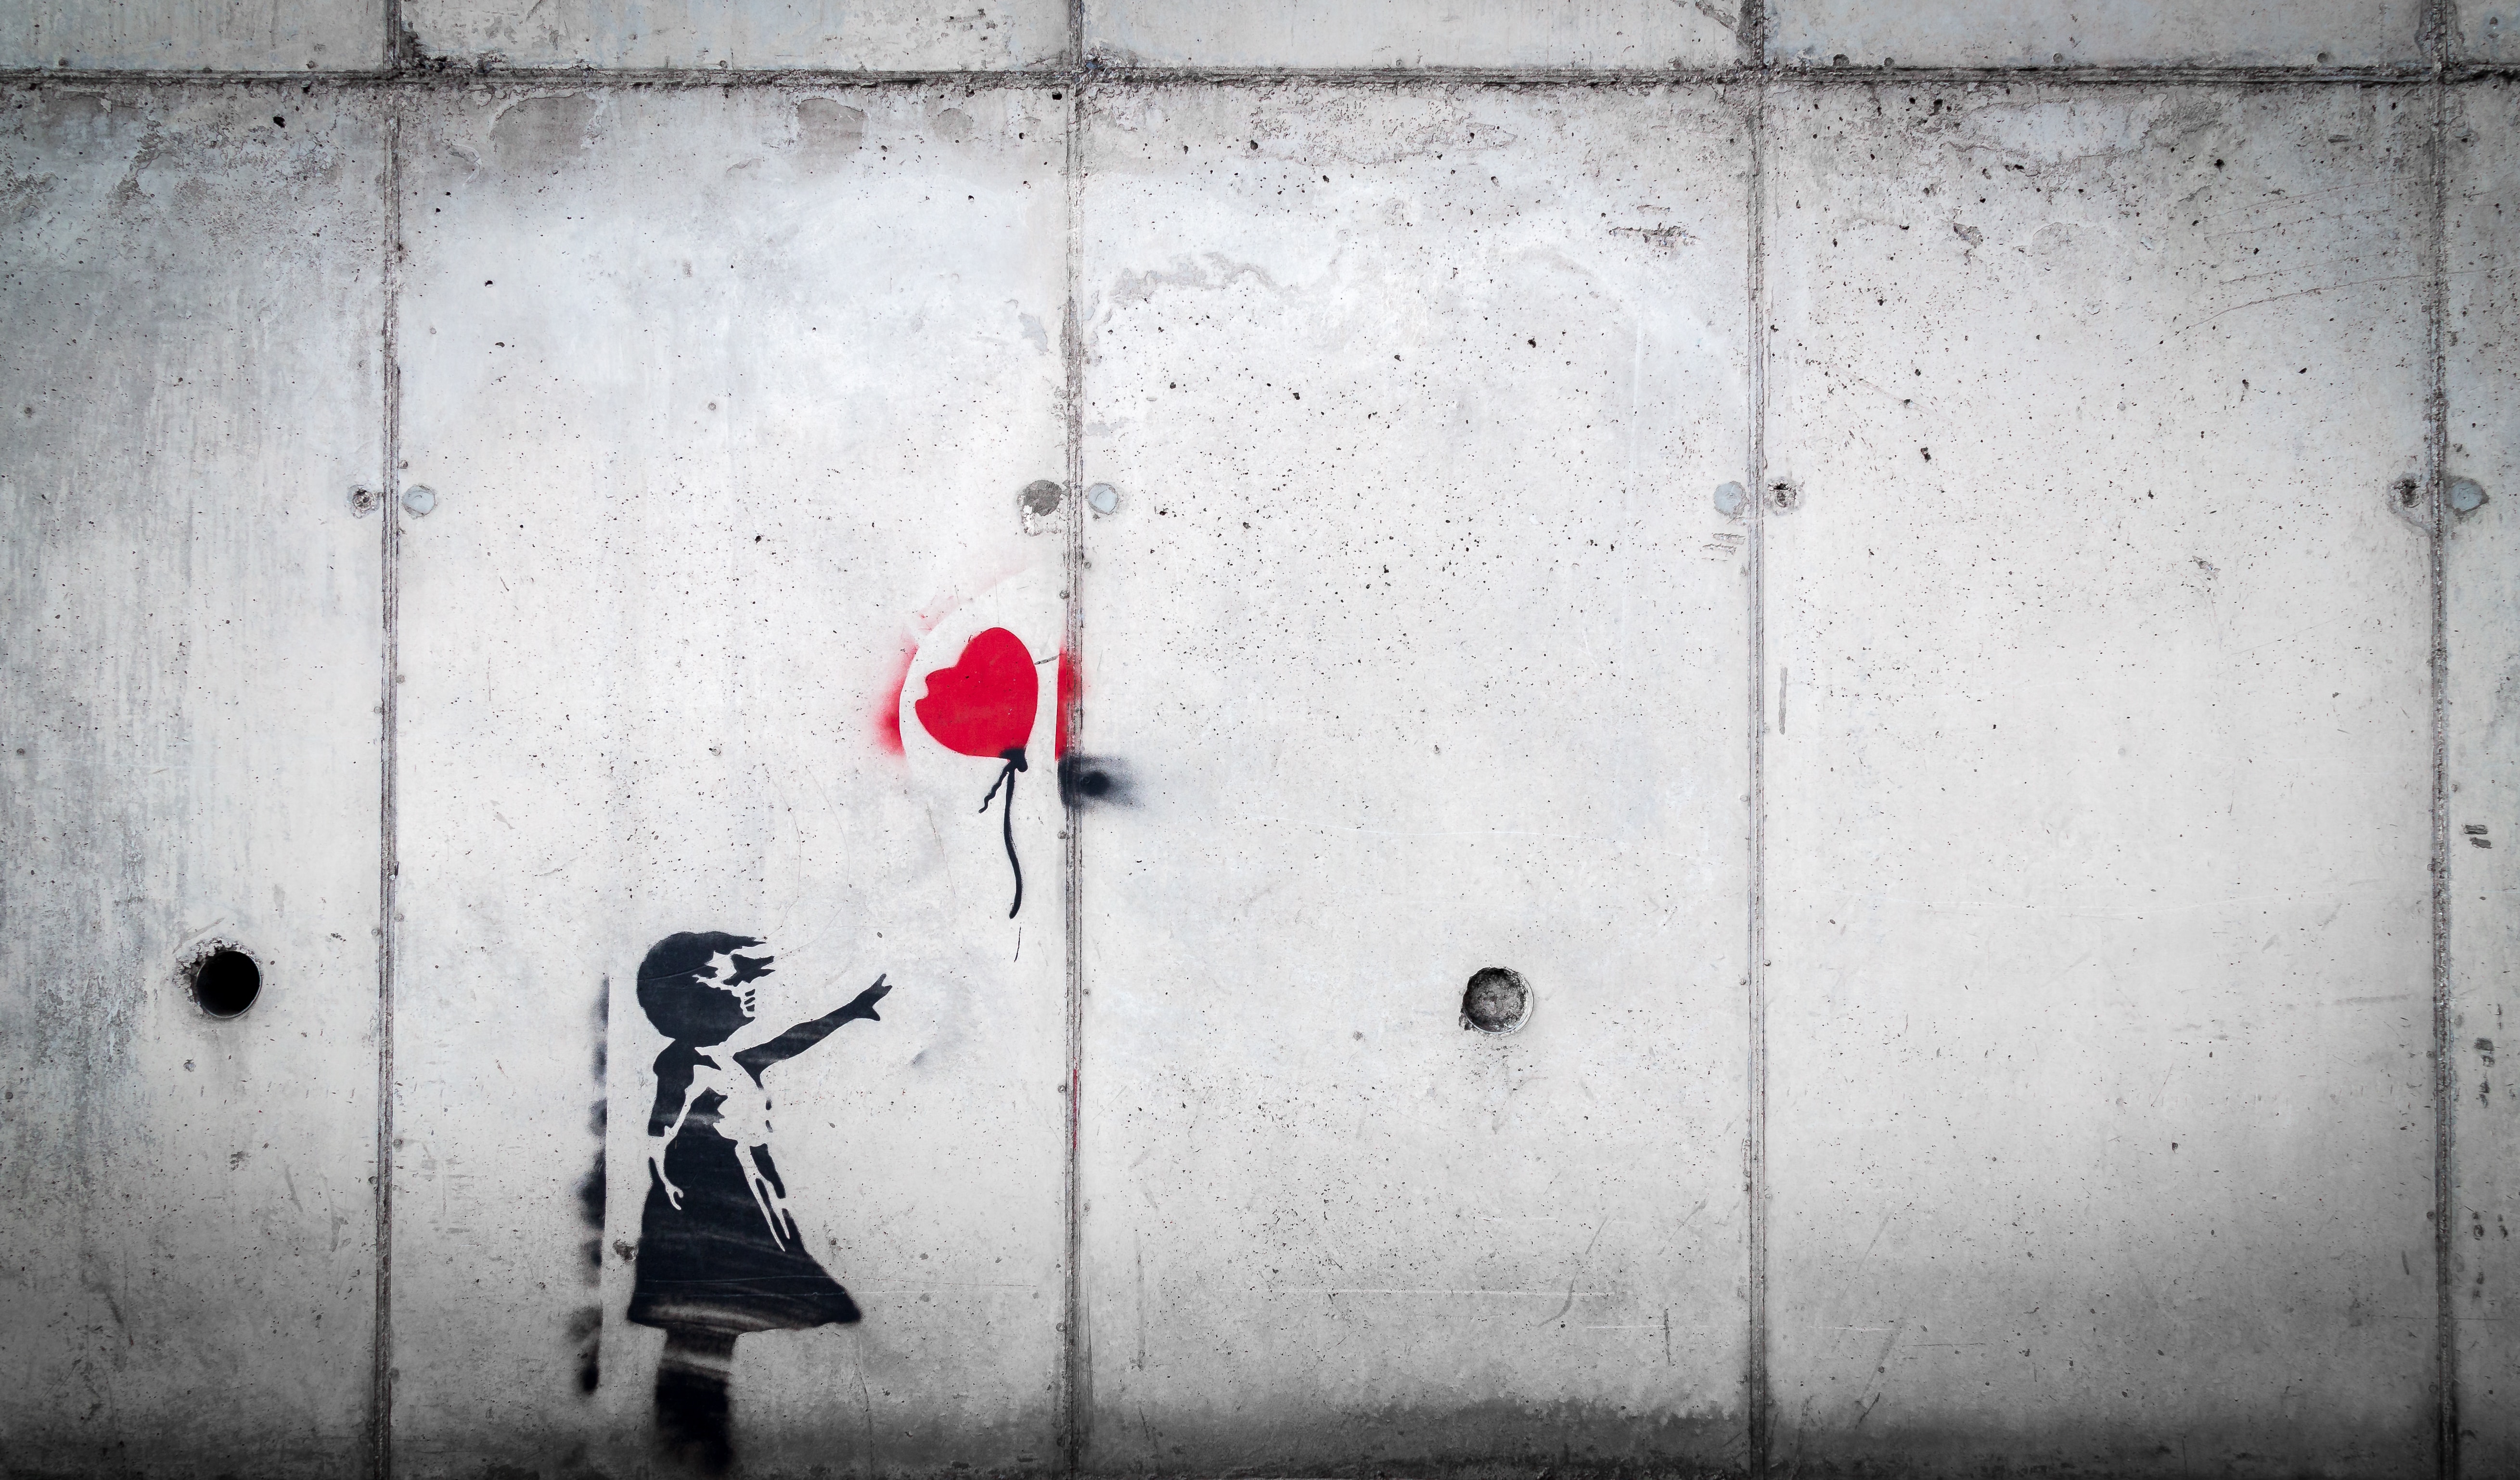 Image of a stenciled girl in black letting go of a red heart balloon